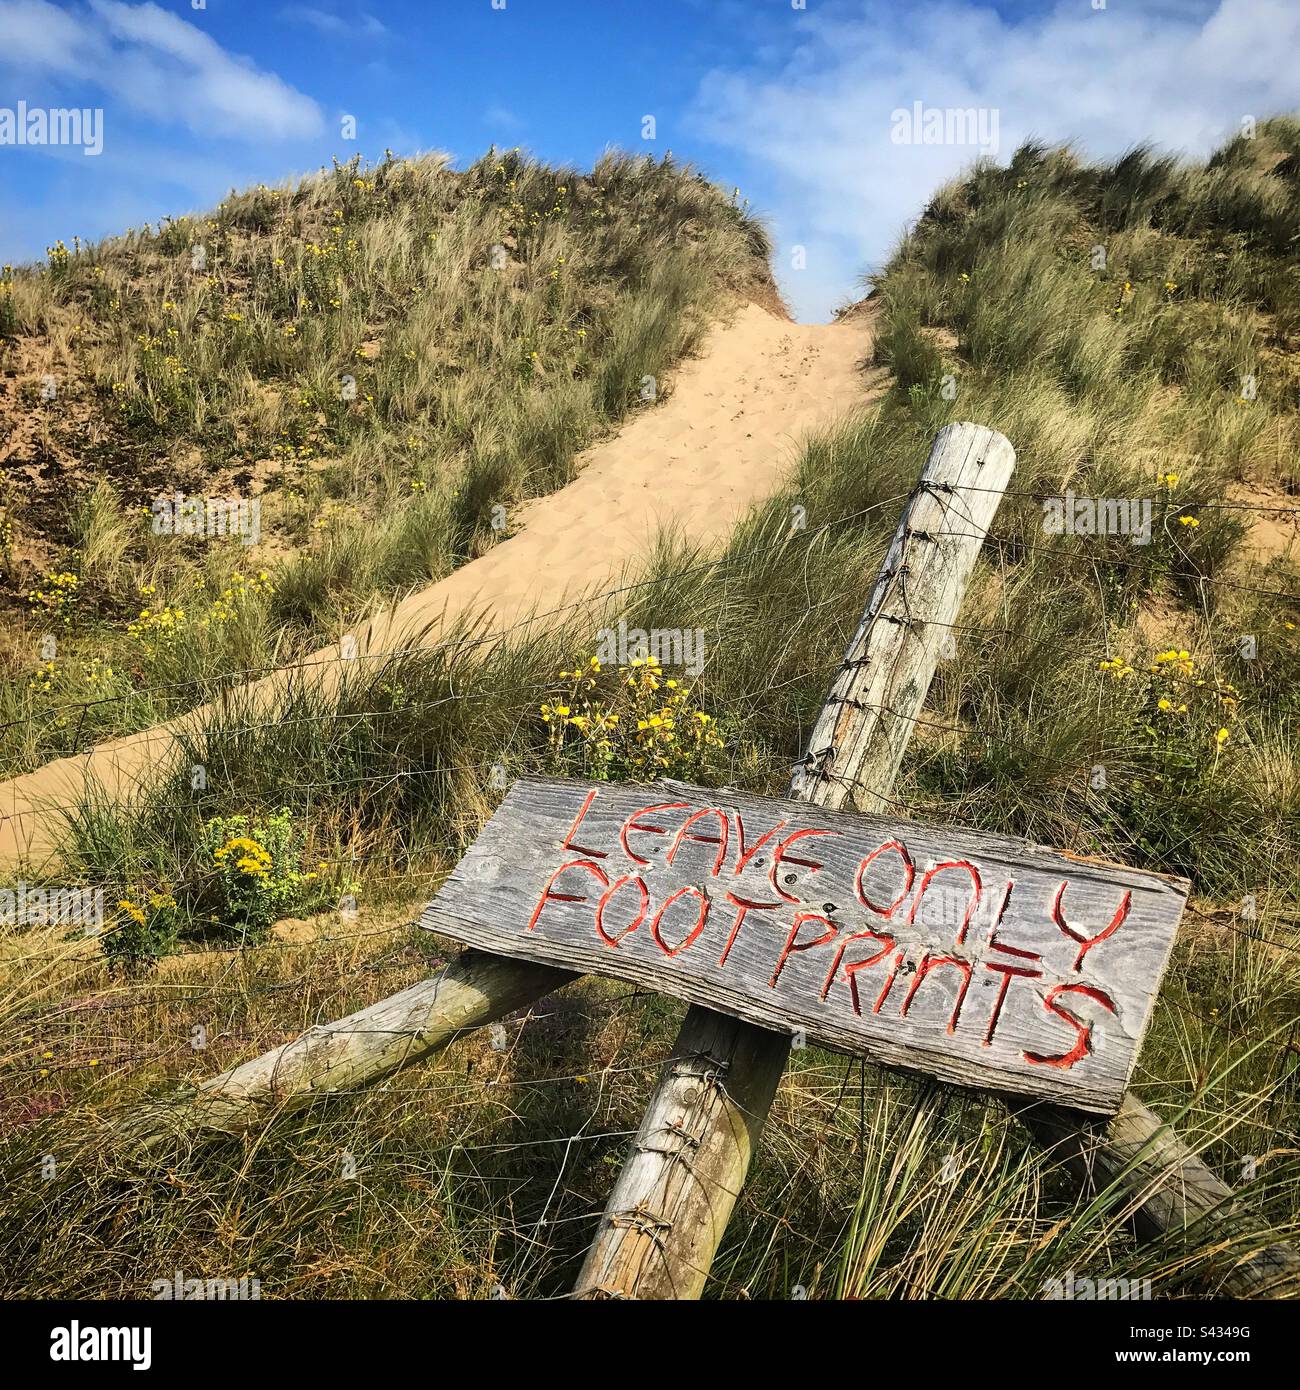 An imaginative sign stating ’leave only footprints’ on a path in the sand dunes of the public beach at Llangennith near Rhossili in the Gower area of West Wales Stock Photo